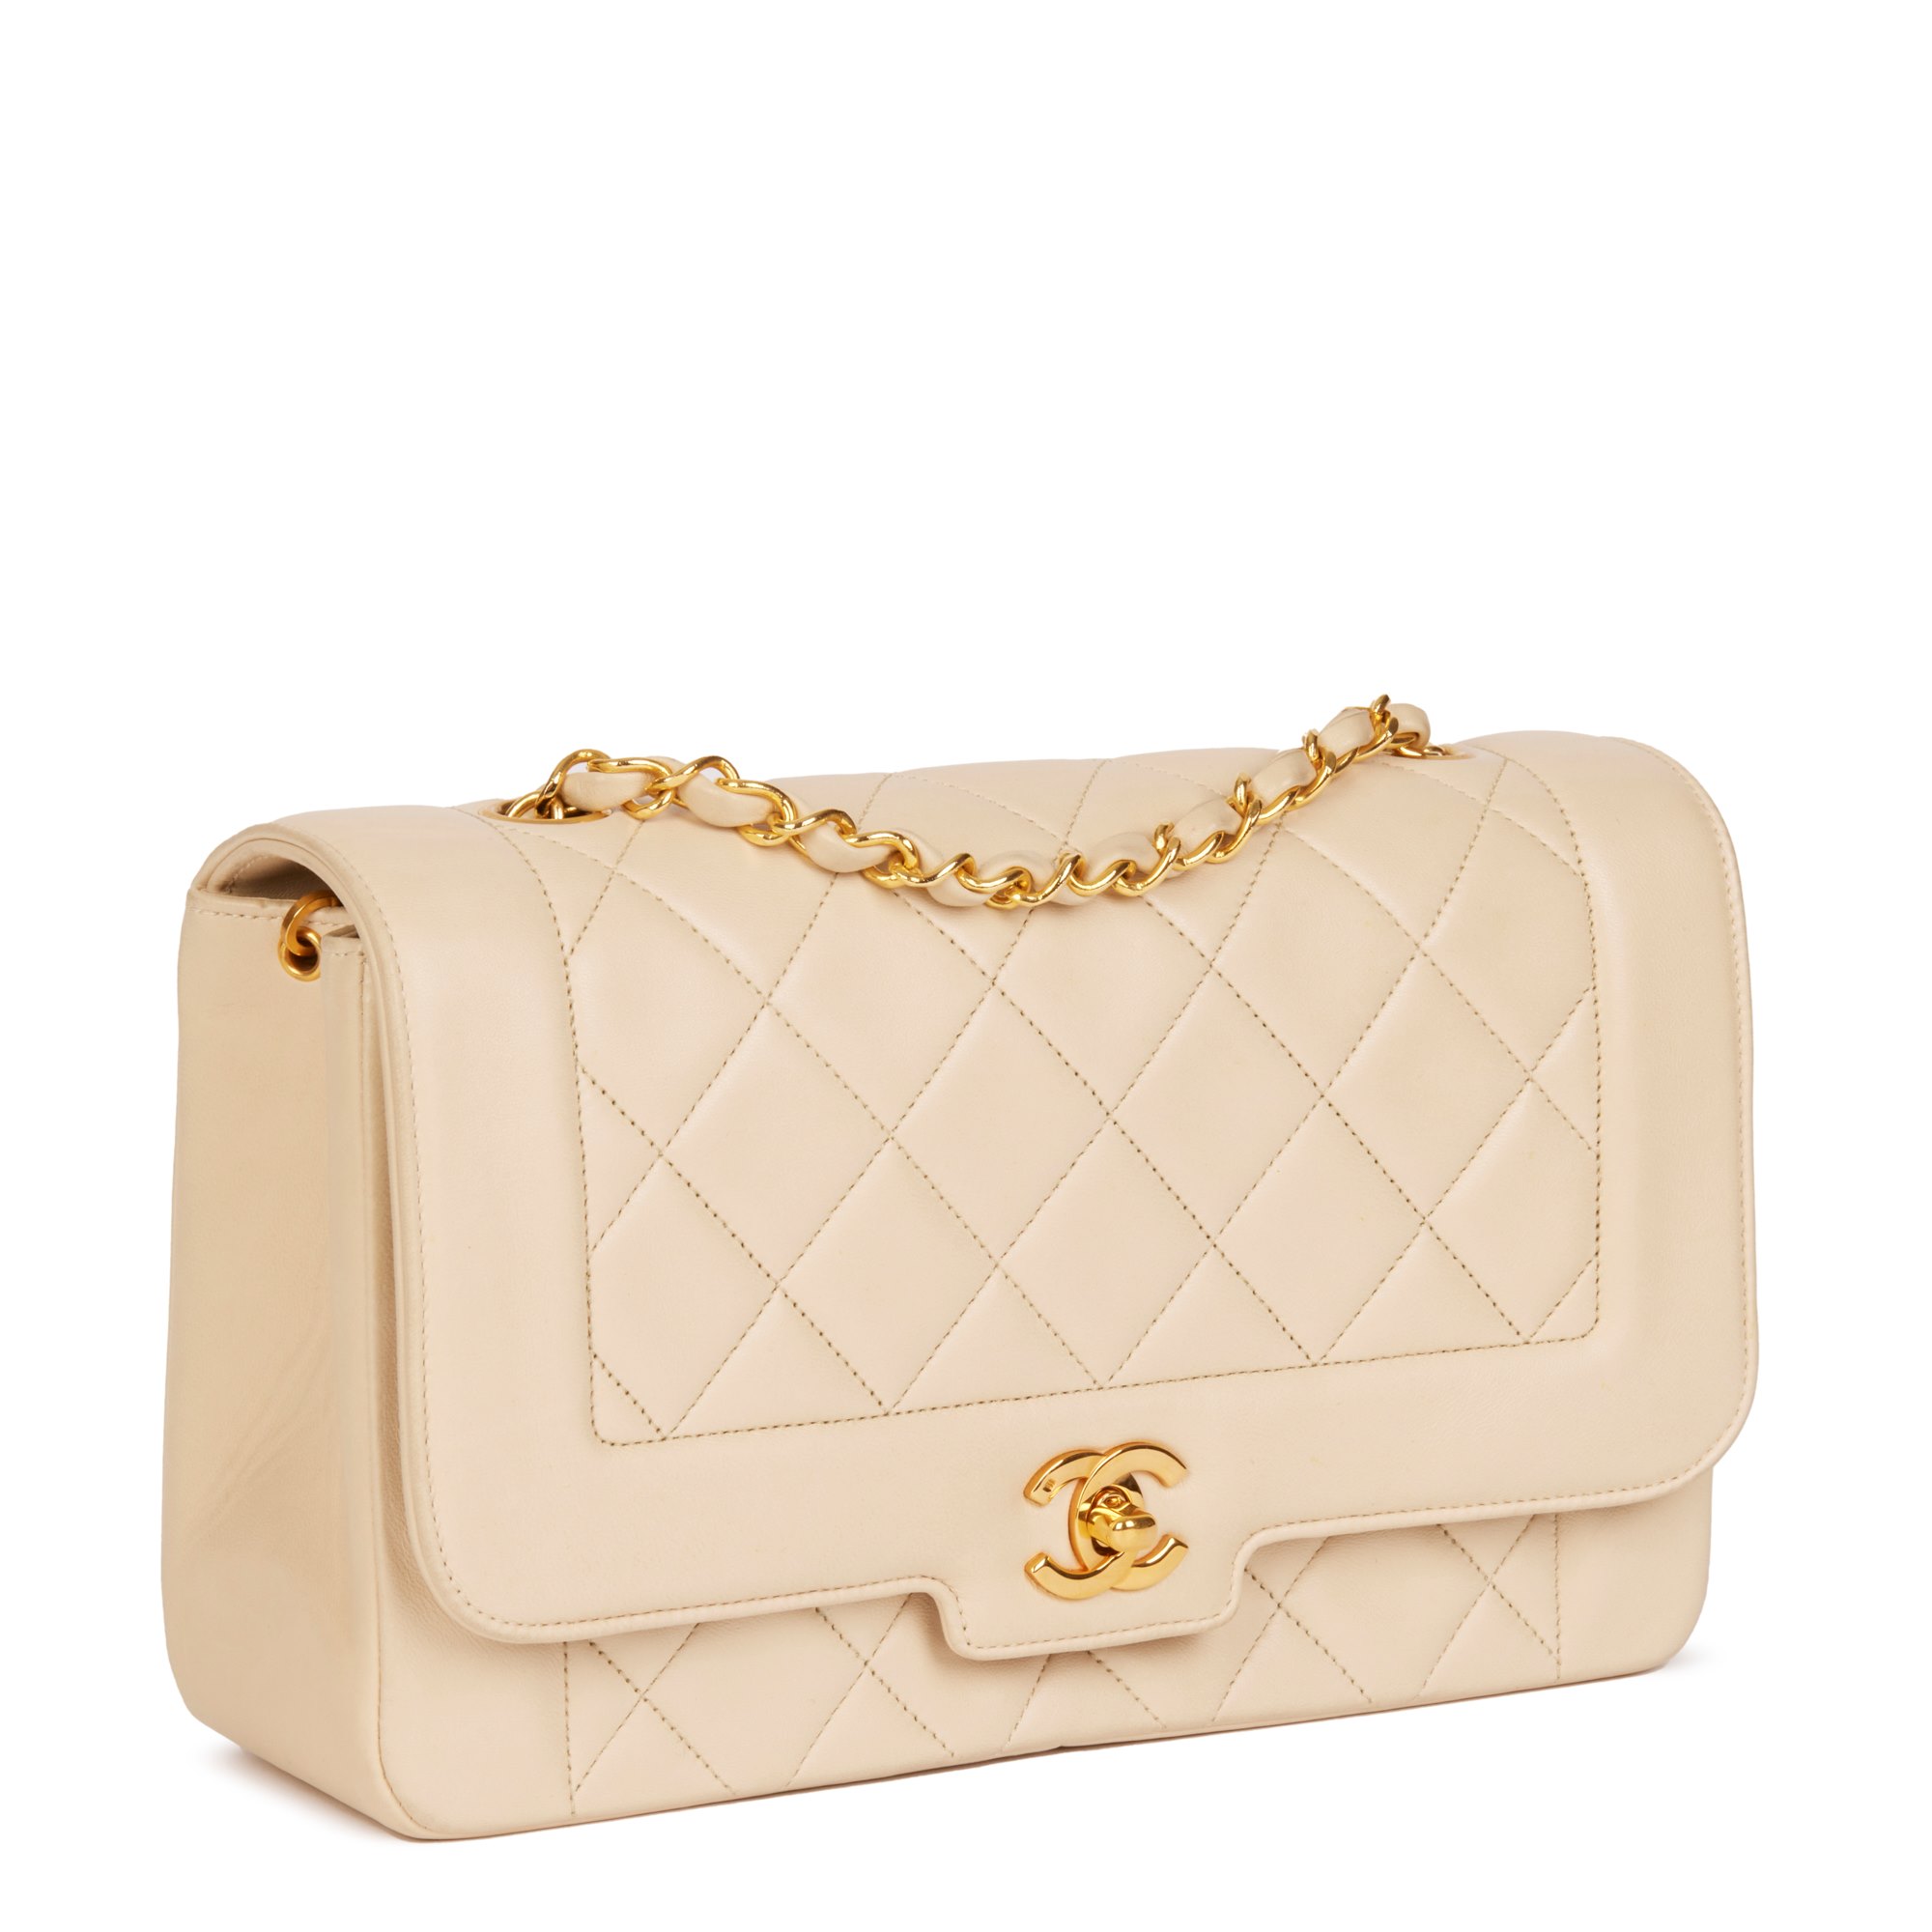 Chanel Ivory Quilted Lambskin Vintage Medium Diana Classic Single Flap Bag